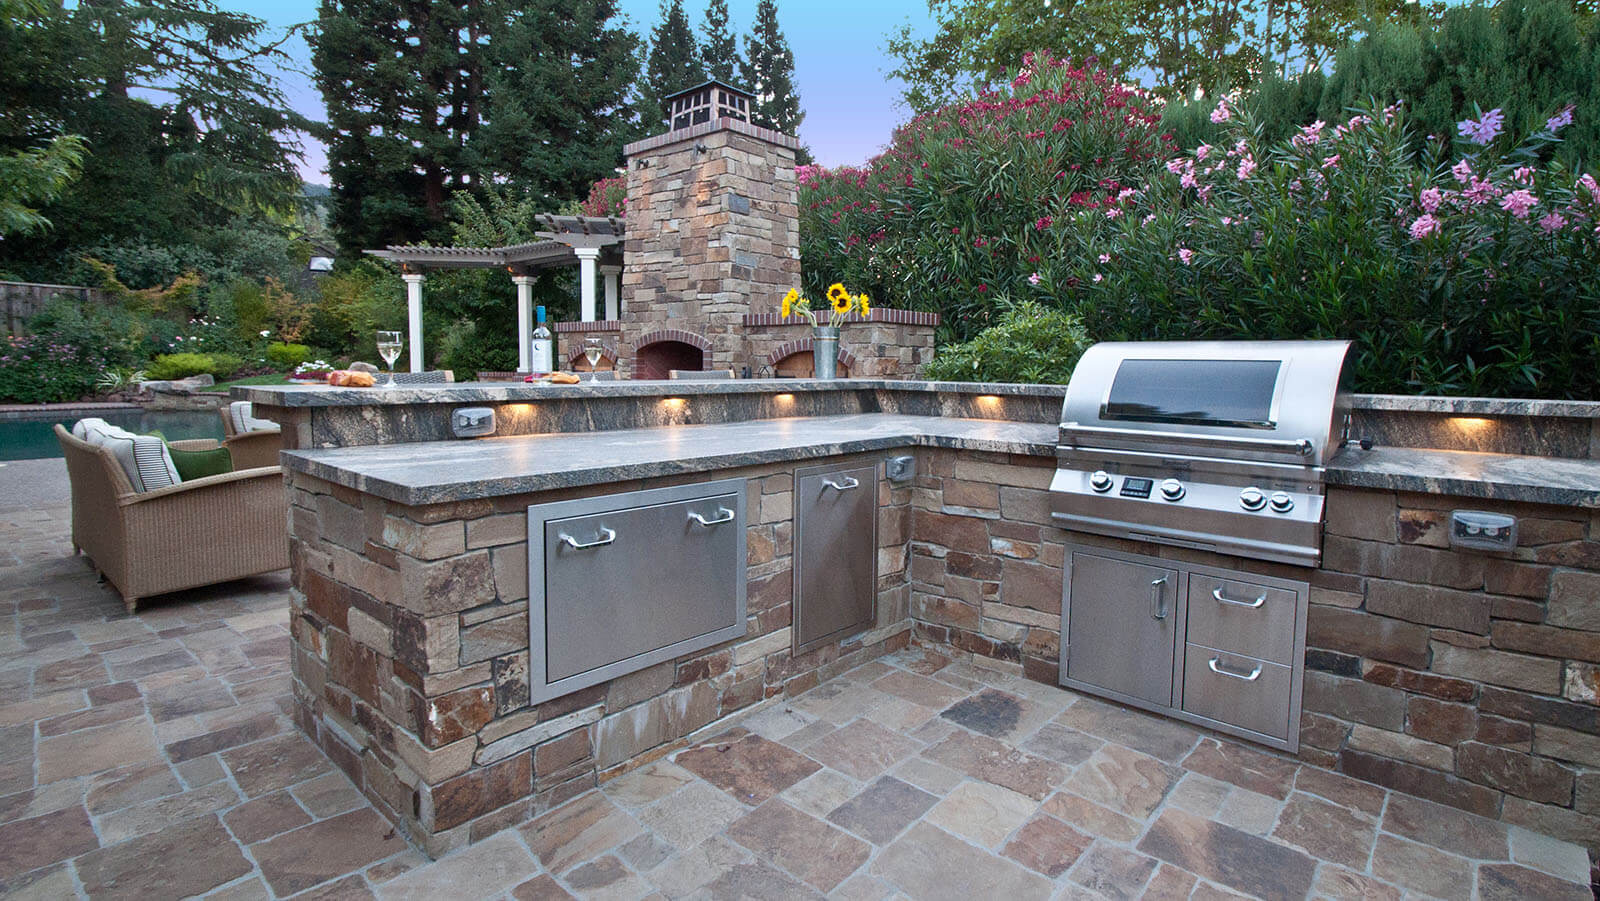 Outdoor kitchen on stone patio with under-counter lighting, built-in contemporary grill, stone fireplace and terraced landscape